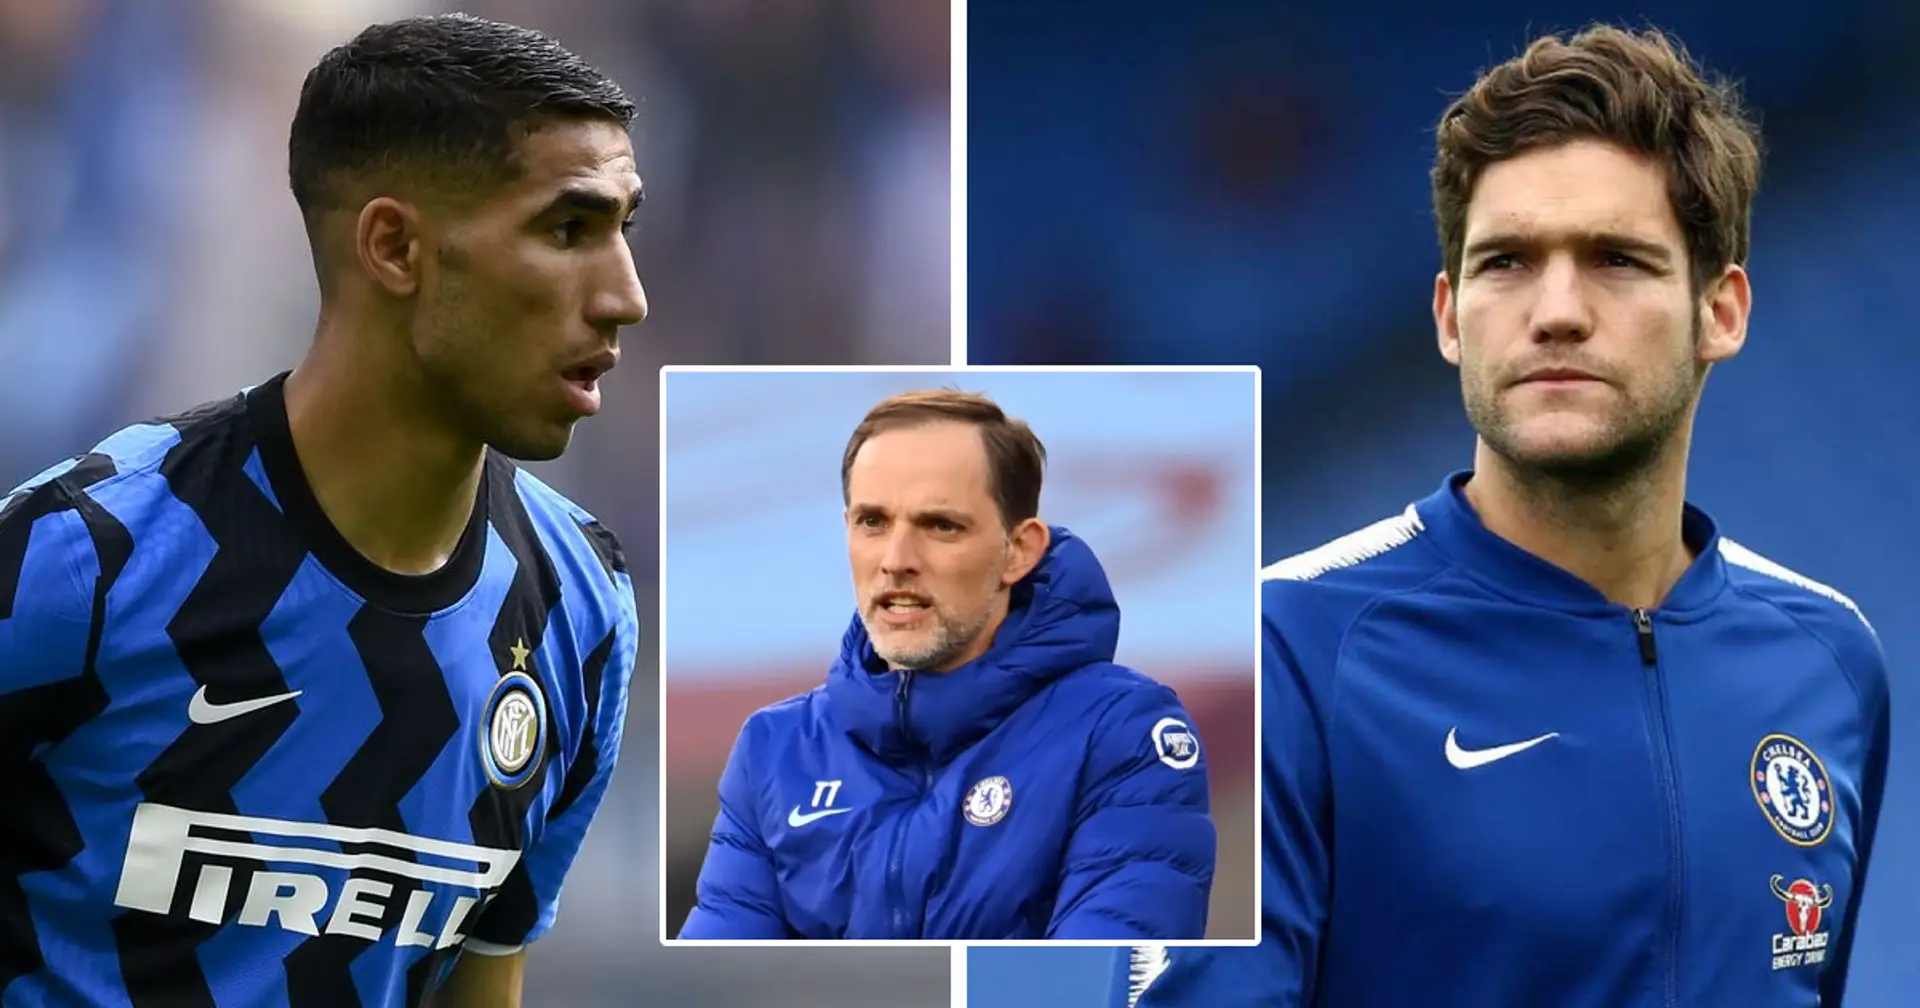 Chelsea offer players for Hakimi, Inter holding out for €80m: Fabrizio Romano (reliability: 5 stars)